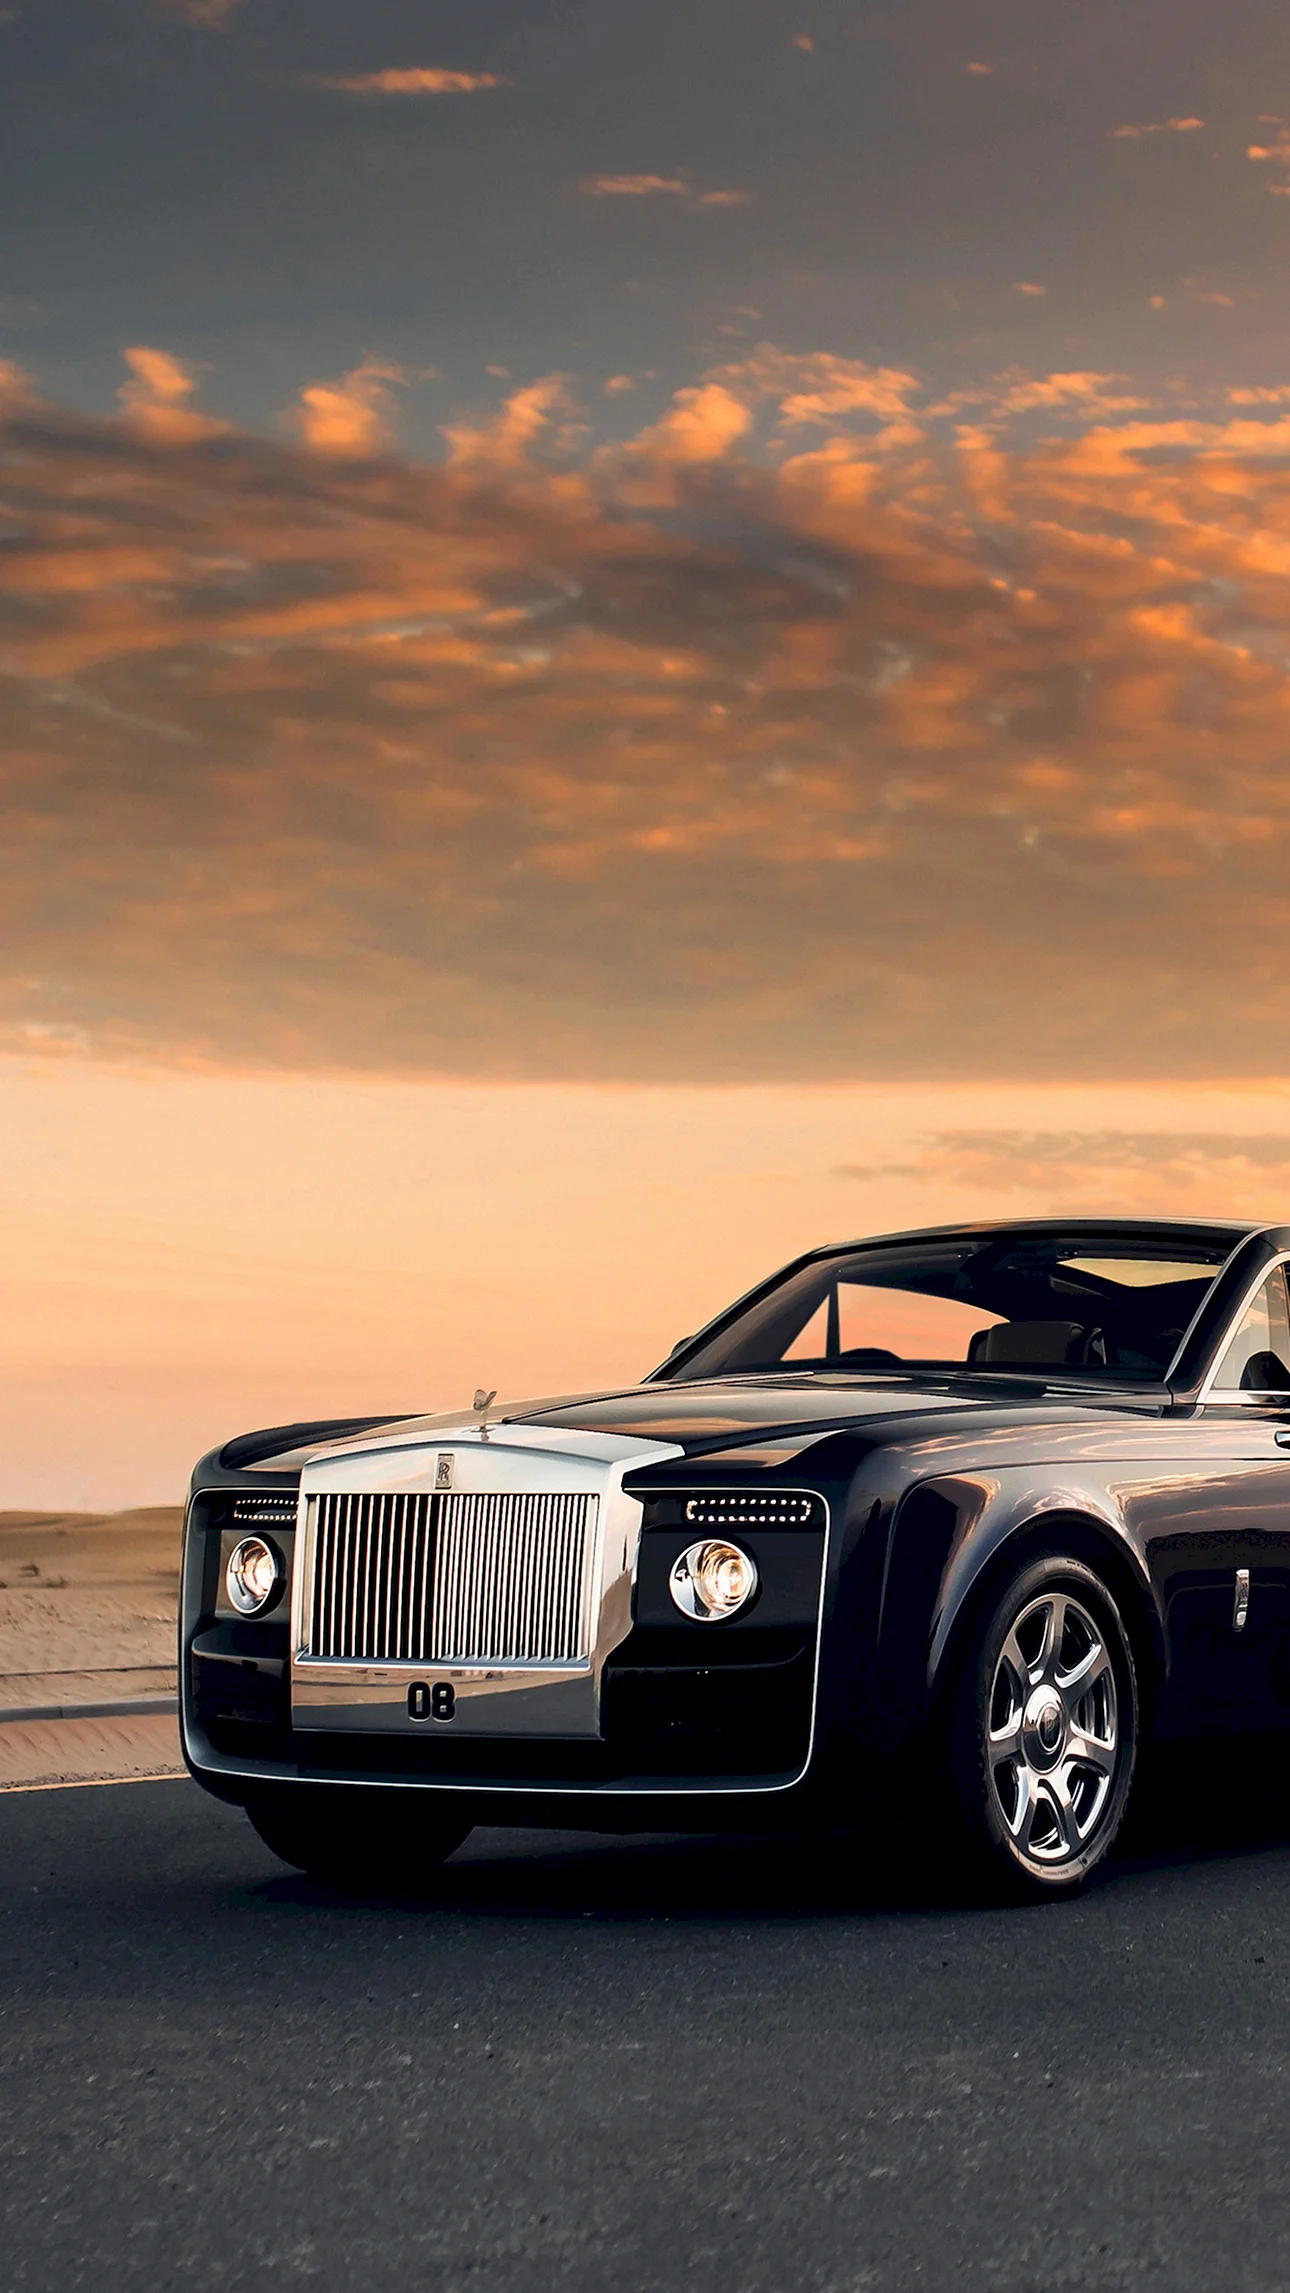 Rolls Royce Sweptail Wallpaper For iPhone